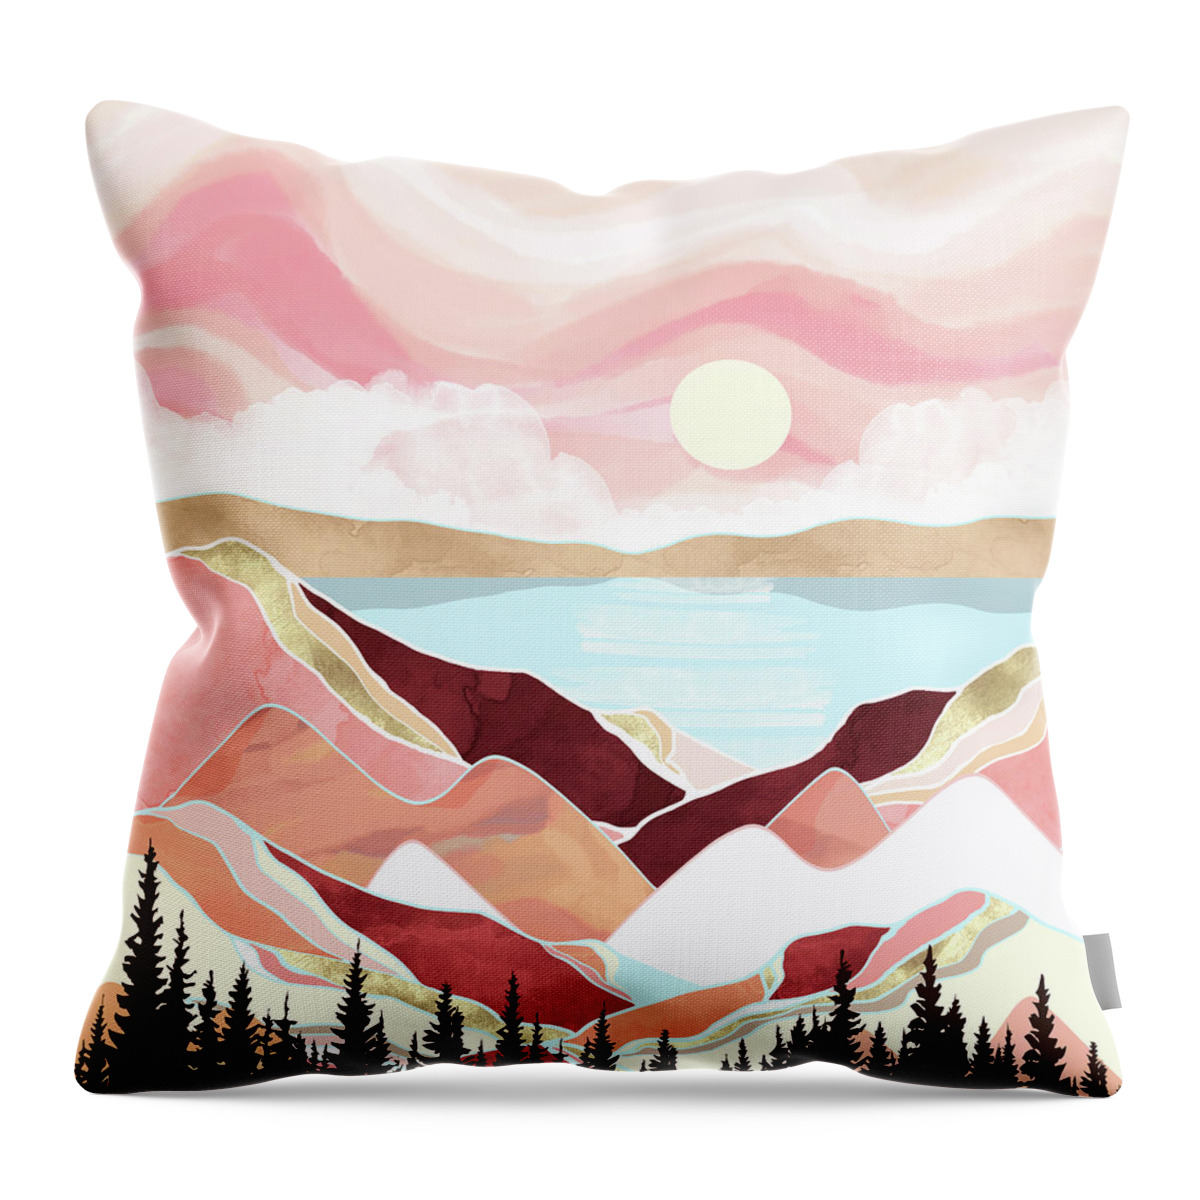 Autumn Throw Pillow featuring the digital art Autumn Lake Sunrise by Spacefrog Designs